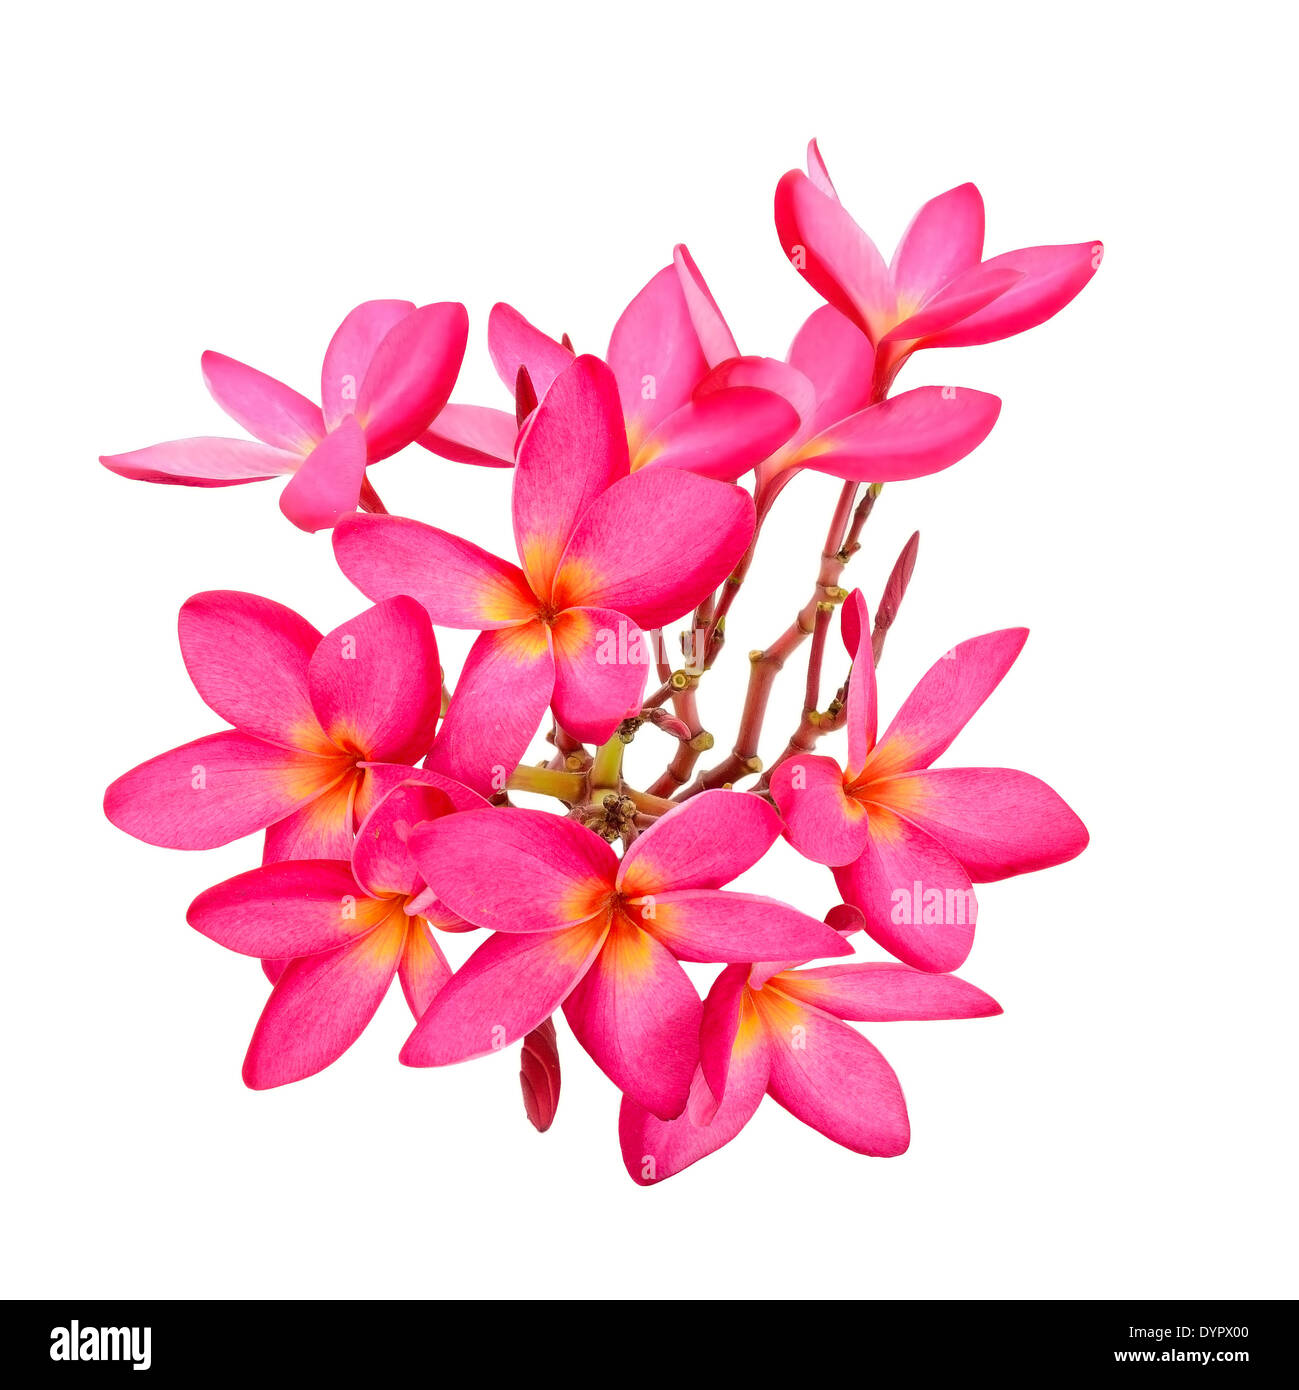 Blossom of red Plumeria flower, tropical flower, isolated on a white background Stock Photo